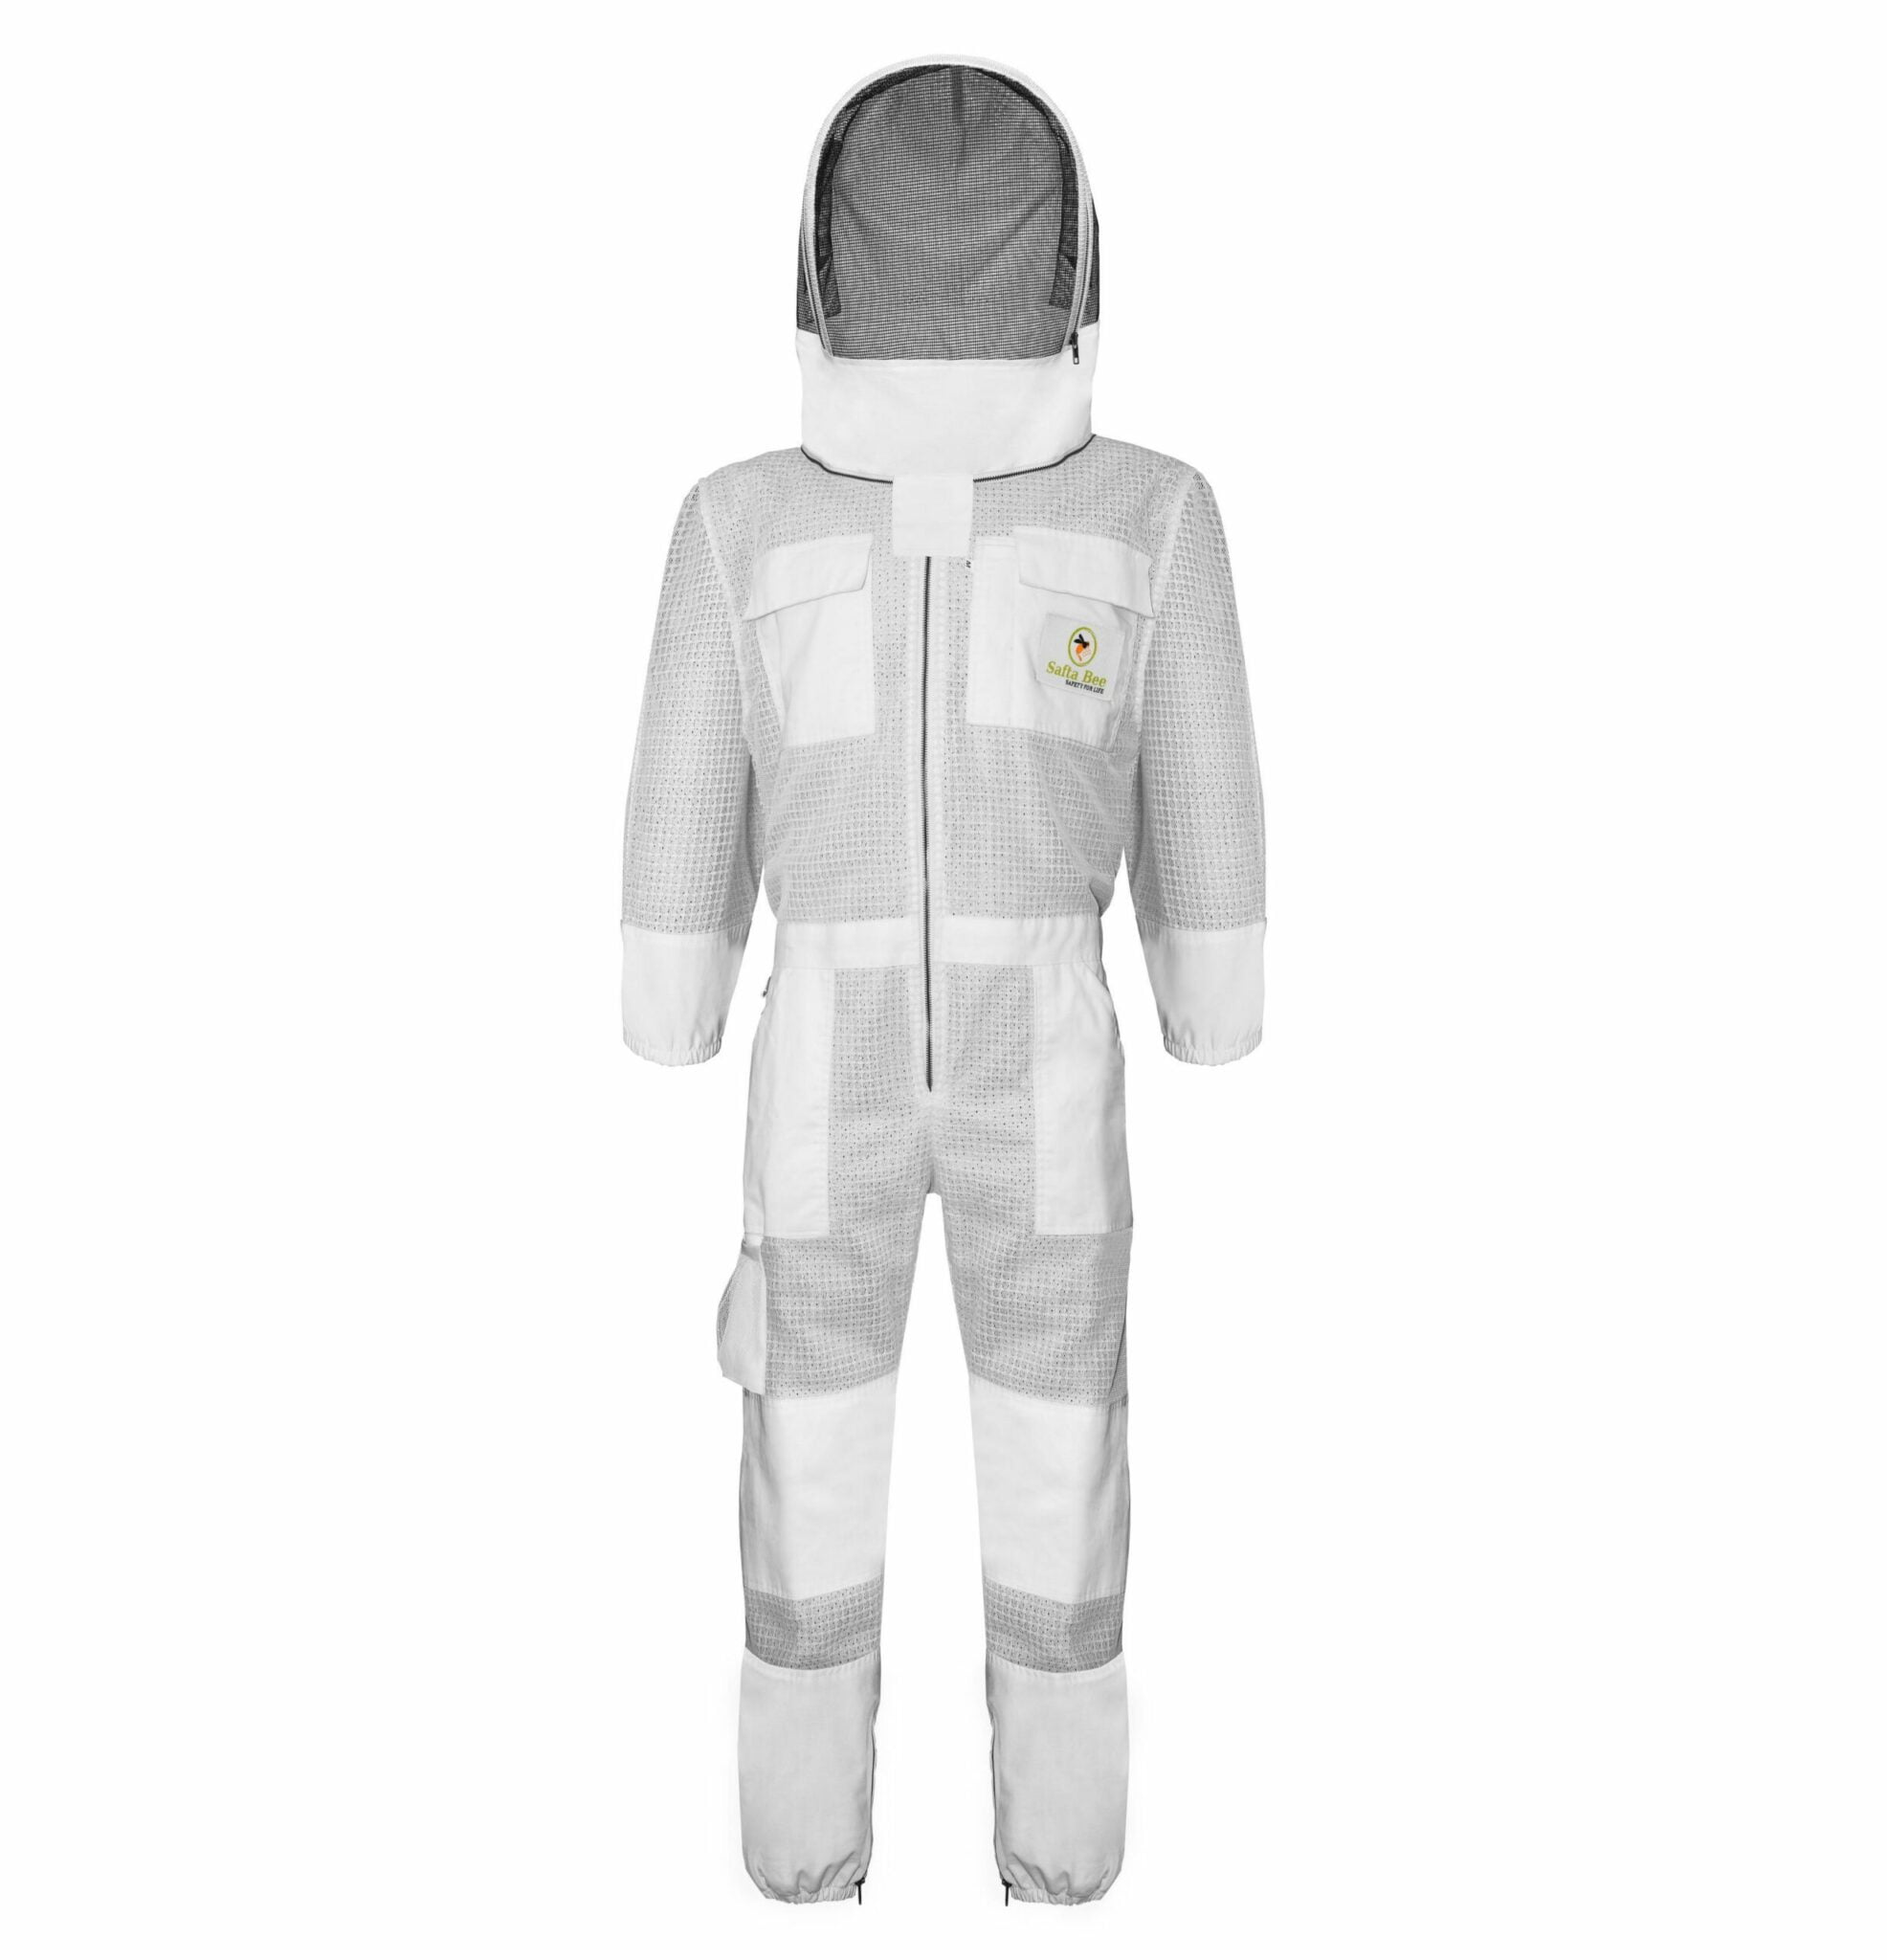 Beekeeping Suit UK | Ventilated Bee Suit Sting Proof 3 Layer